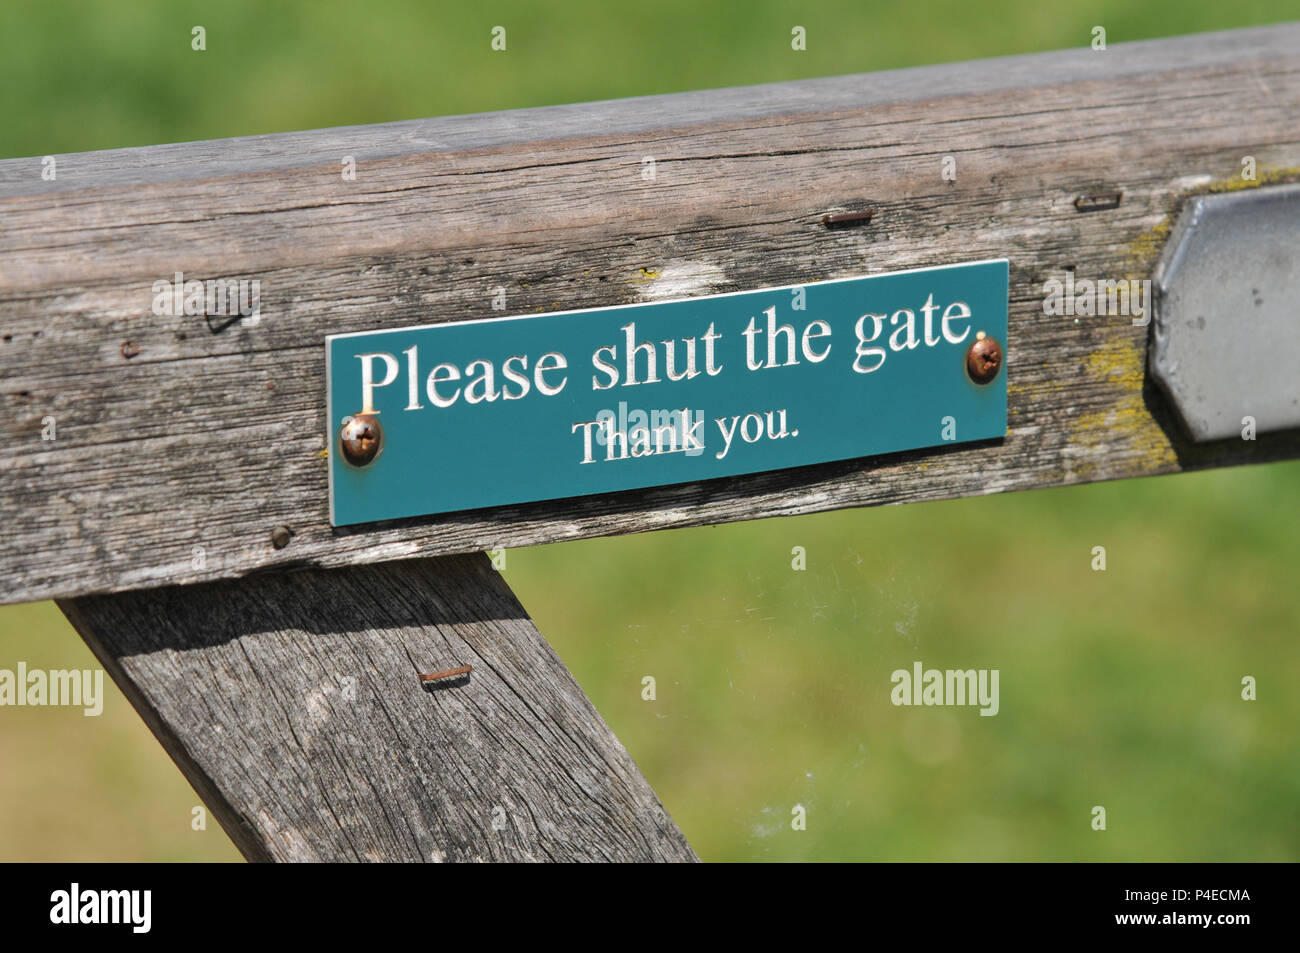 Please shut the gate sign screwed to a wooden gate Stock Photo